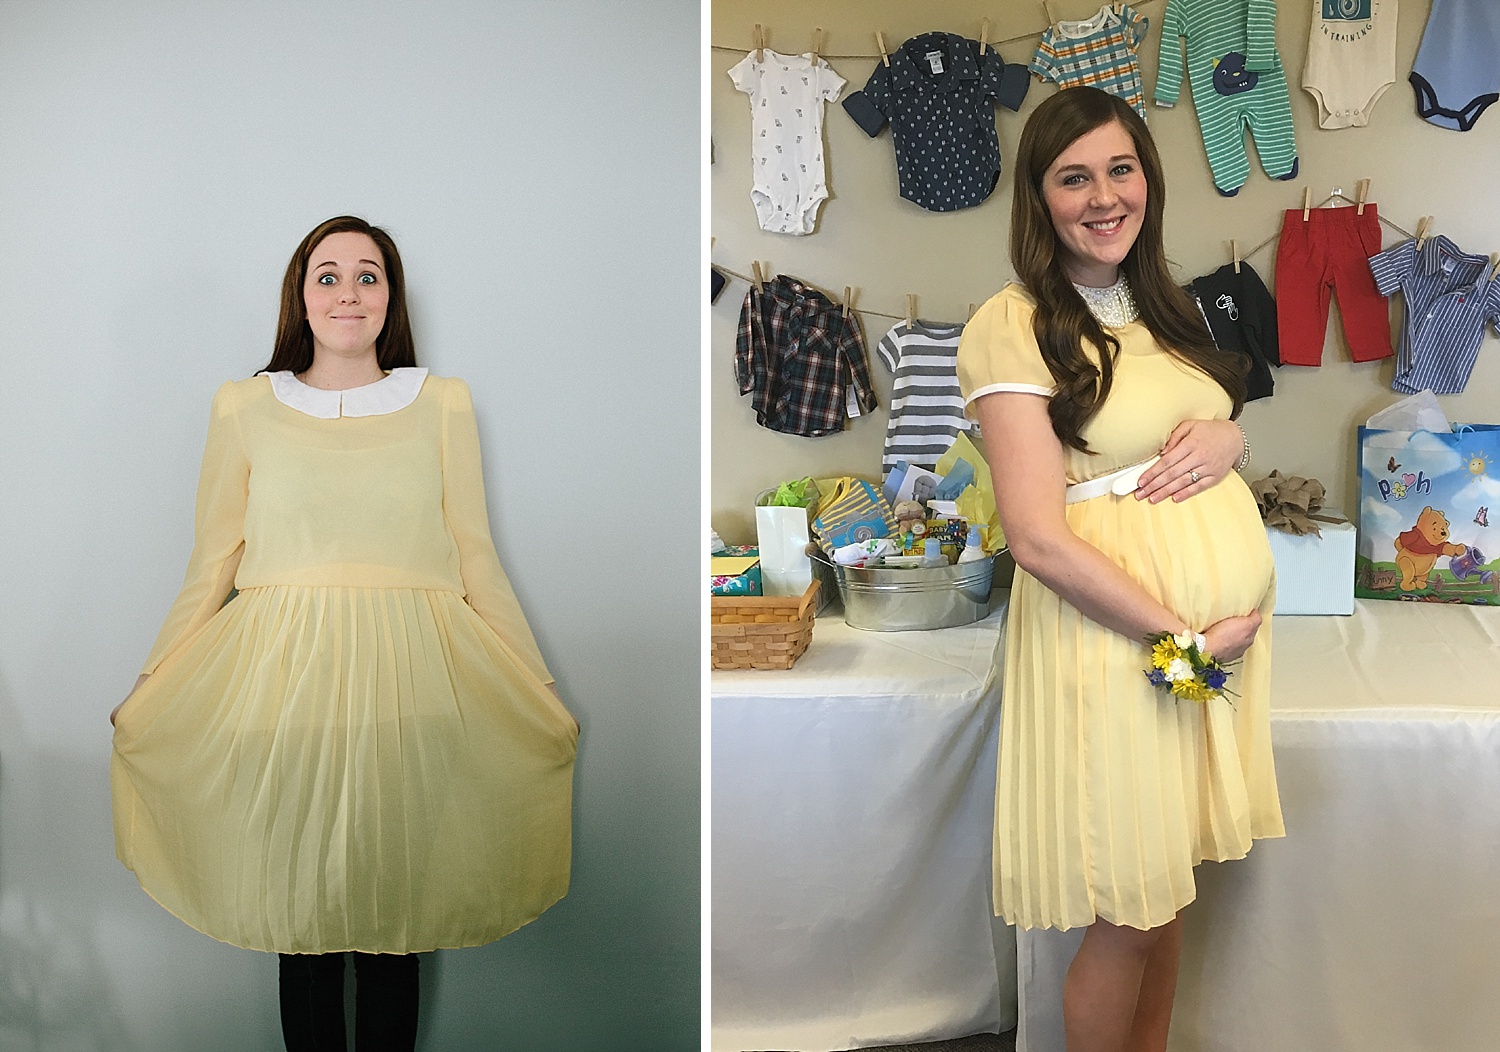 Full Size of Baby Shower:baby Shower Dresses Trendy Affordable Maternity Clothes Inexpensive Maternity Clothes Maternity Dresses For Photoshoot Mom And Dad Baby Shower Outfits Used Maternity Clothes Cute Inexpensive Maternity Clothes Baby Shower Dresses For Winter